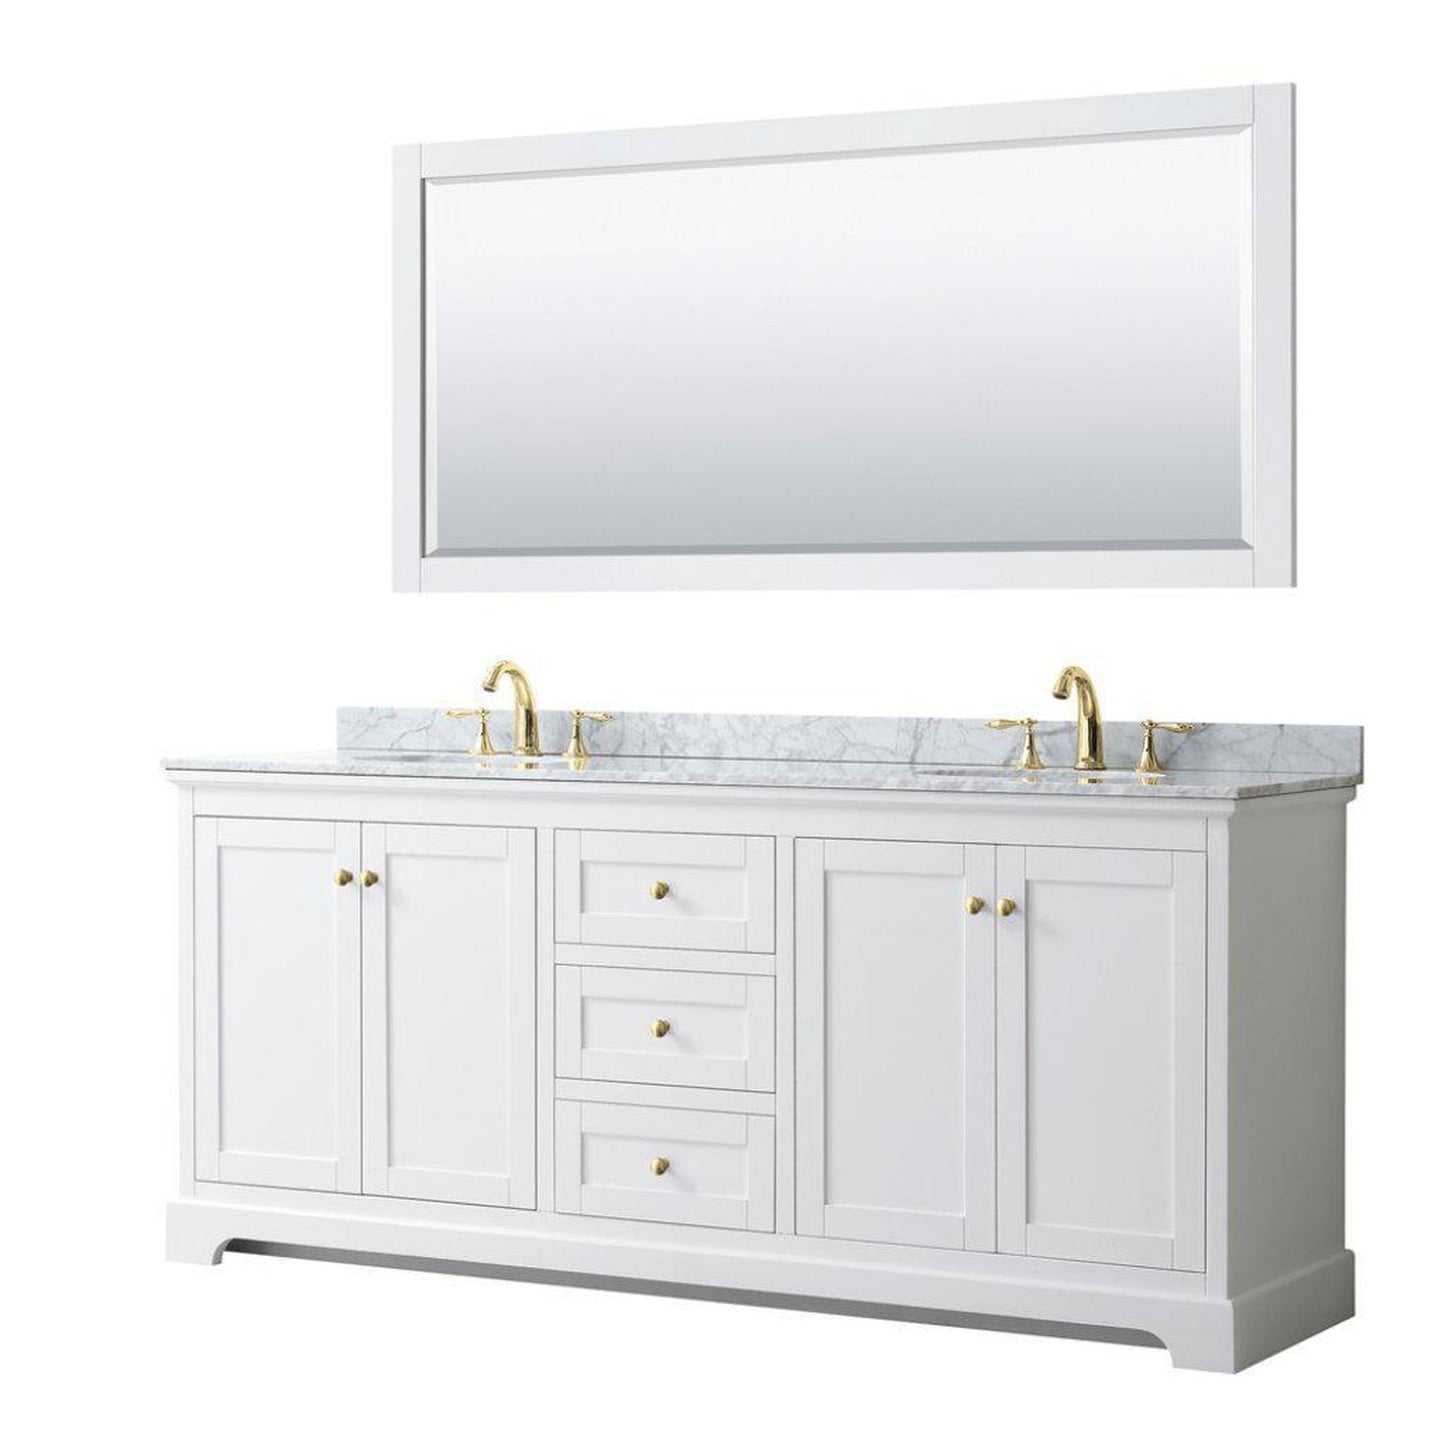 Wyndham Collection Avery 80" White Double Bathroom Vanity Set, White Carrara Marble Countertop With 3-Hole Faucet, 8" Oval Sink, 70" Mirror, Gold Trims